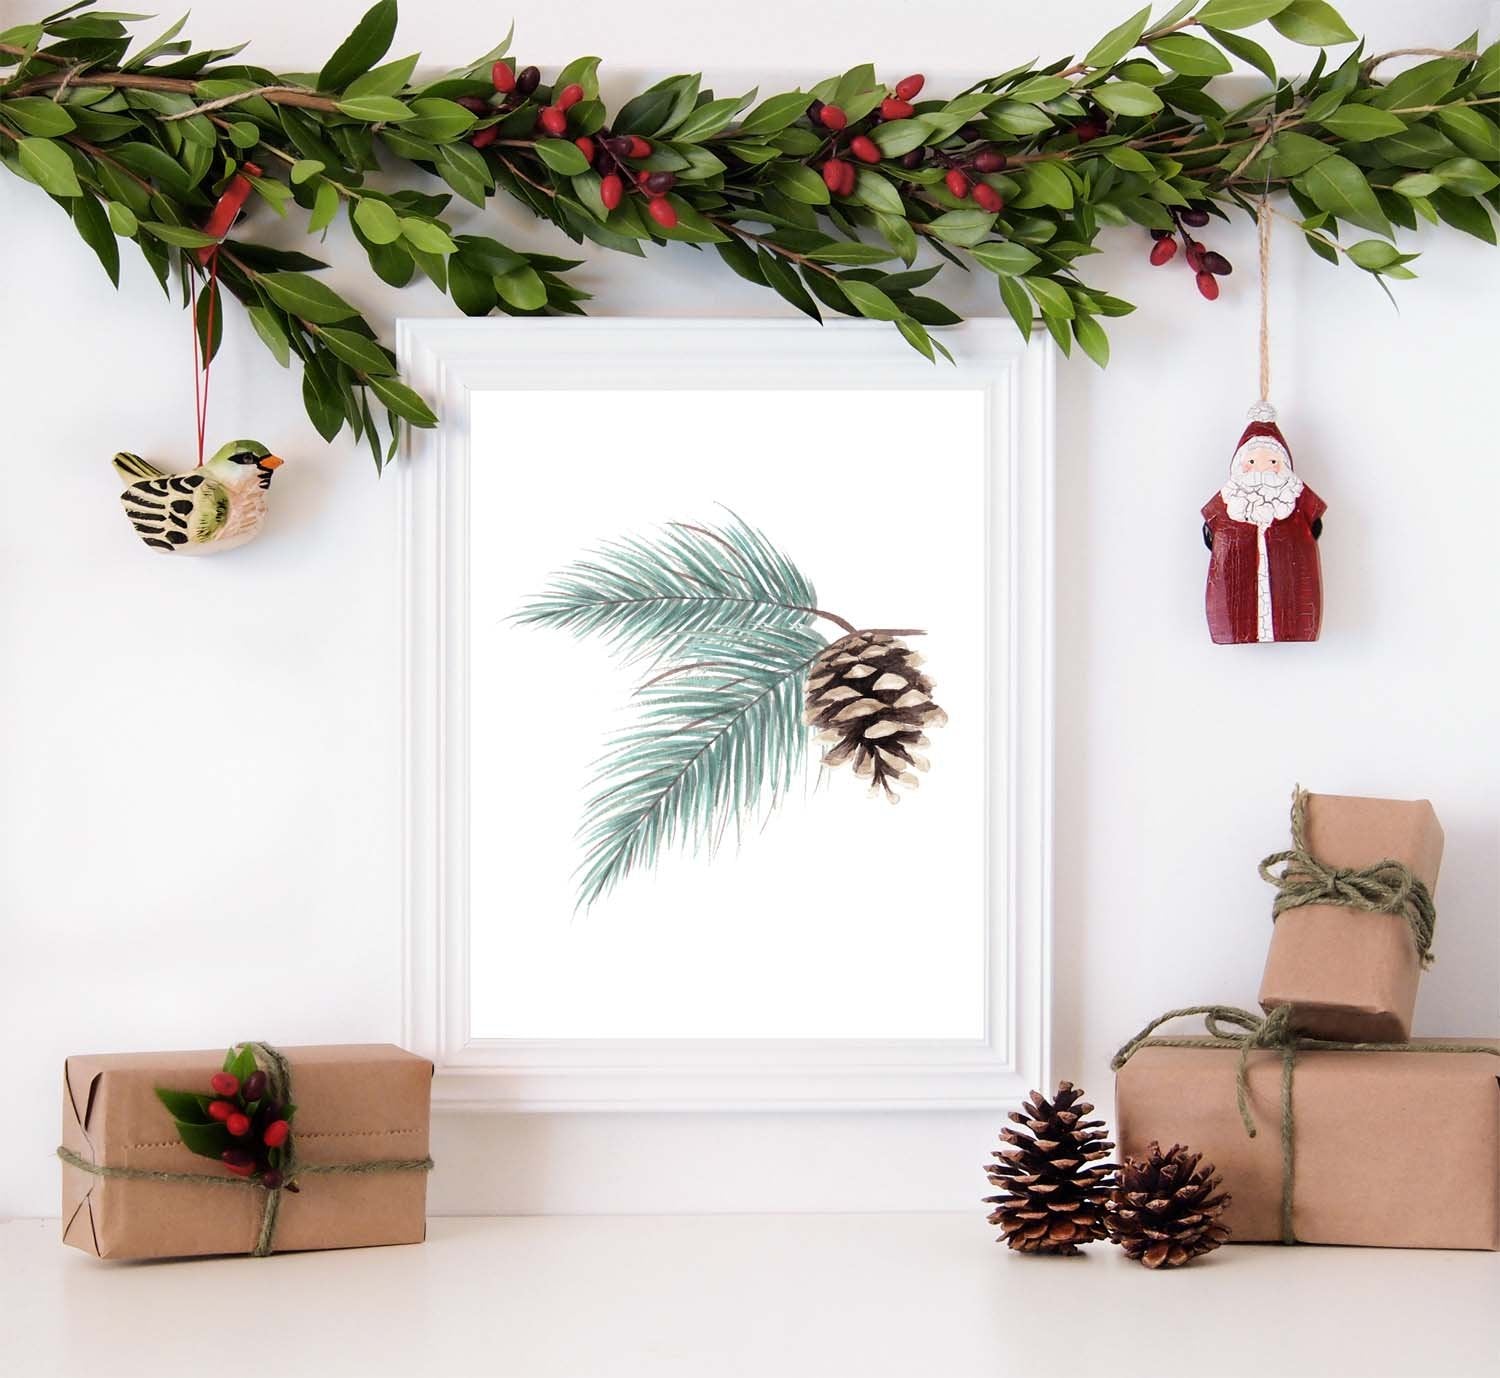 Watercolor painting of evergreen branches and pinecone shown in a white frame surrounded by christmas decorations